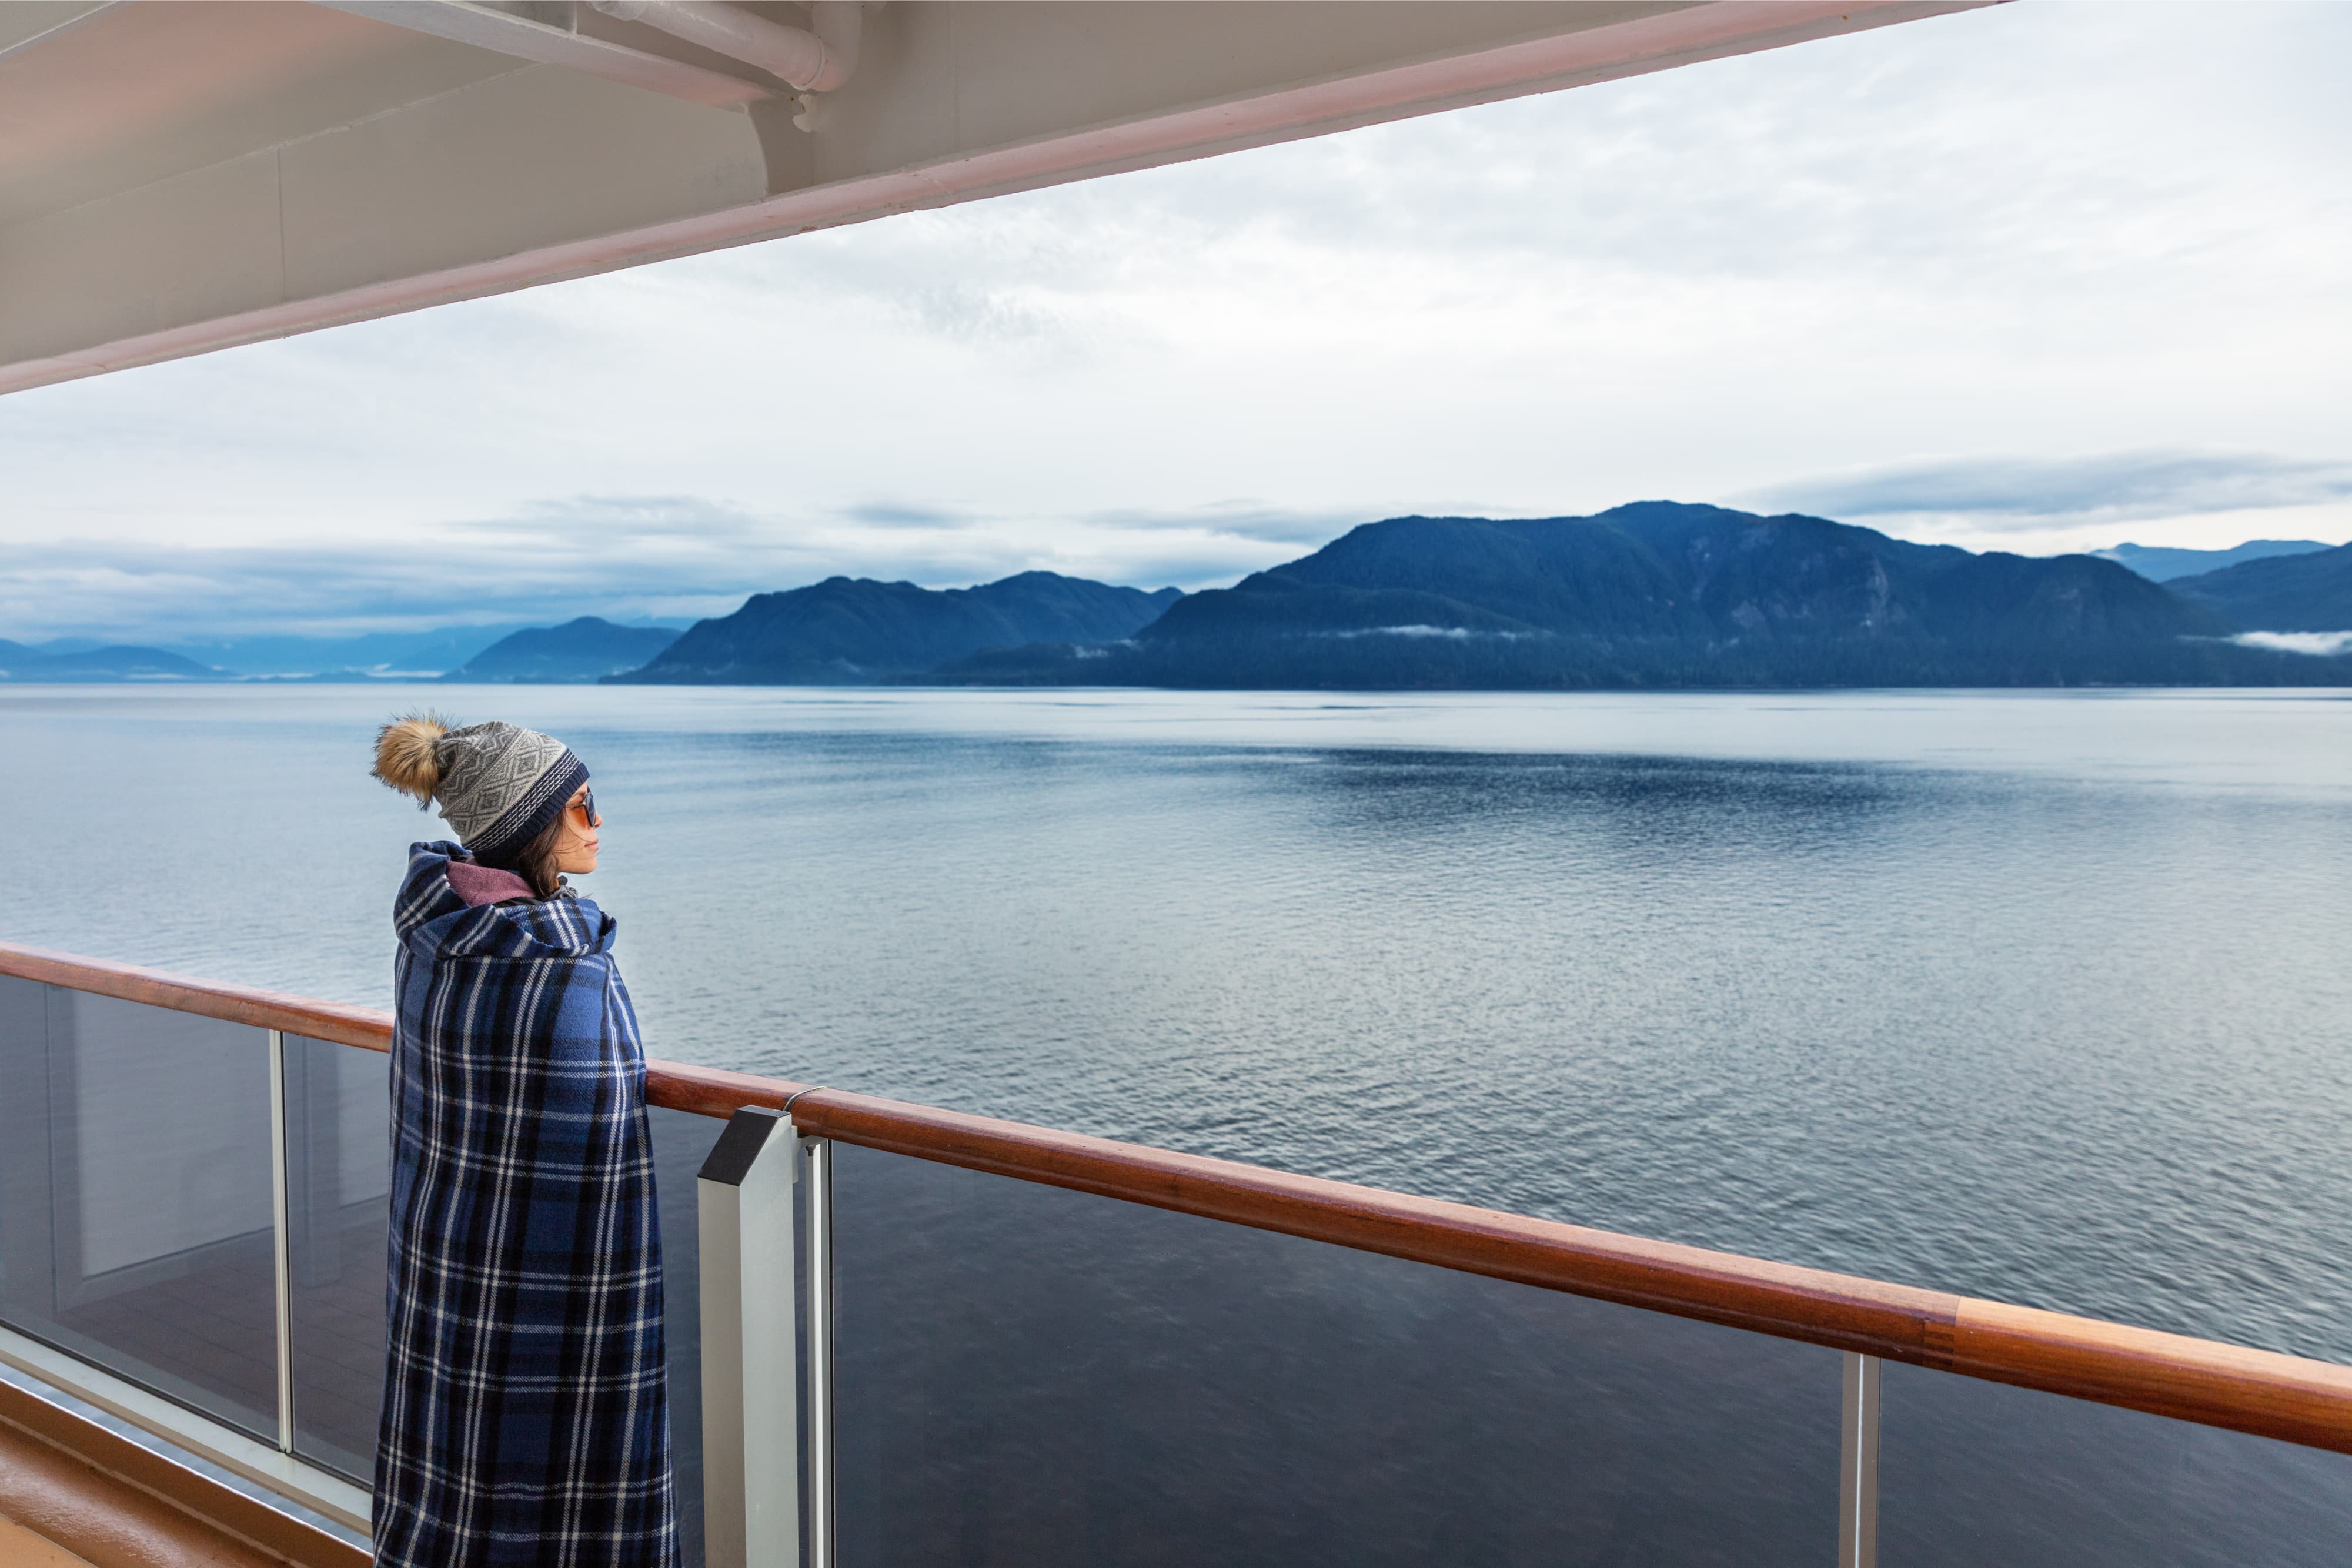 Alaska cruise travel luxury vacation woman watching inside passage scenic cruising day on balcony deck enjoying view of mountains and nature landscape. Asian girl tourist with wool blanket